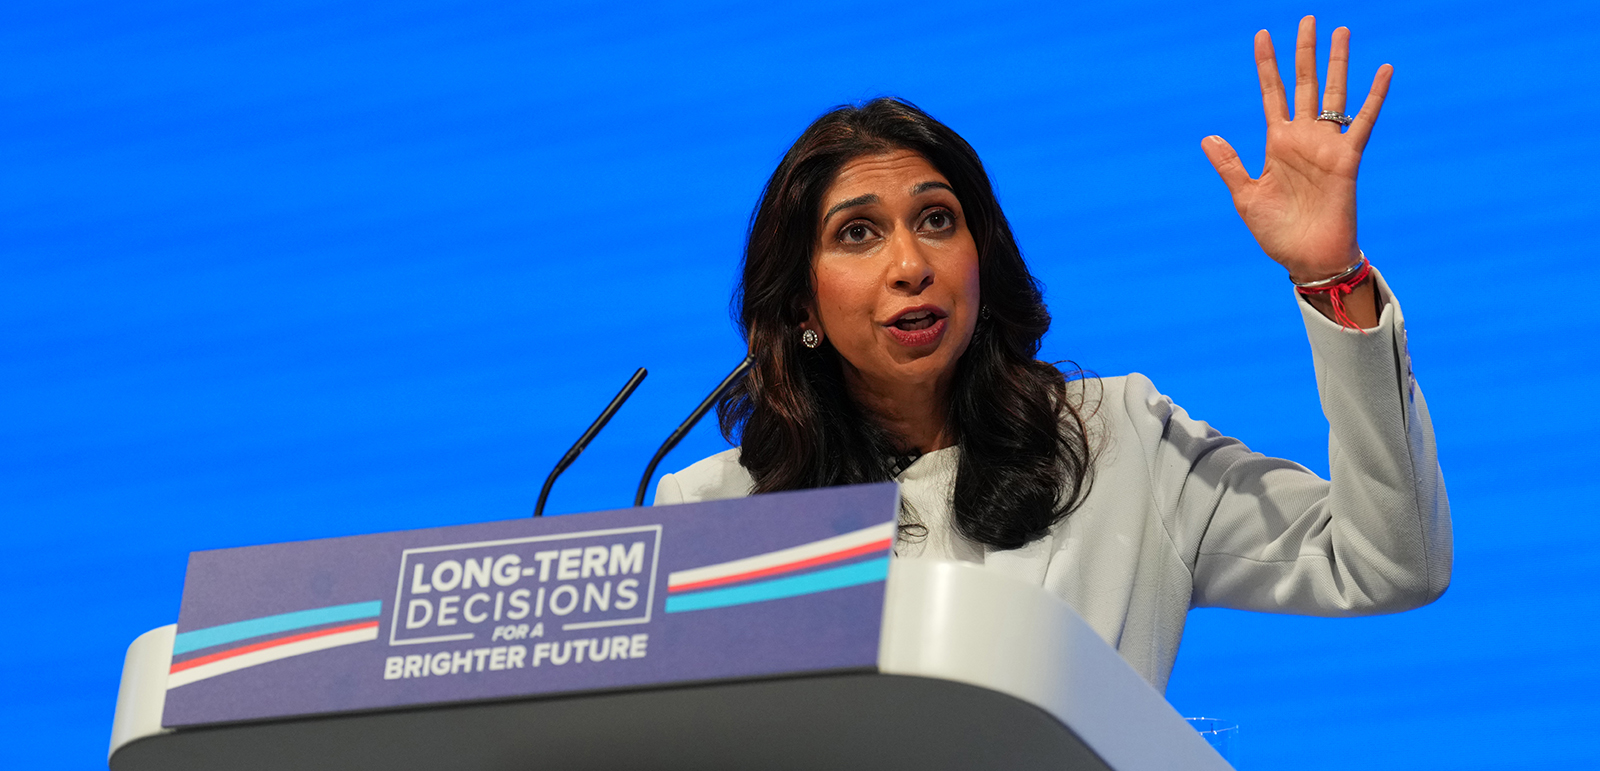 UK Home Secretary Suella Braverman at the Conservative Party conference.